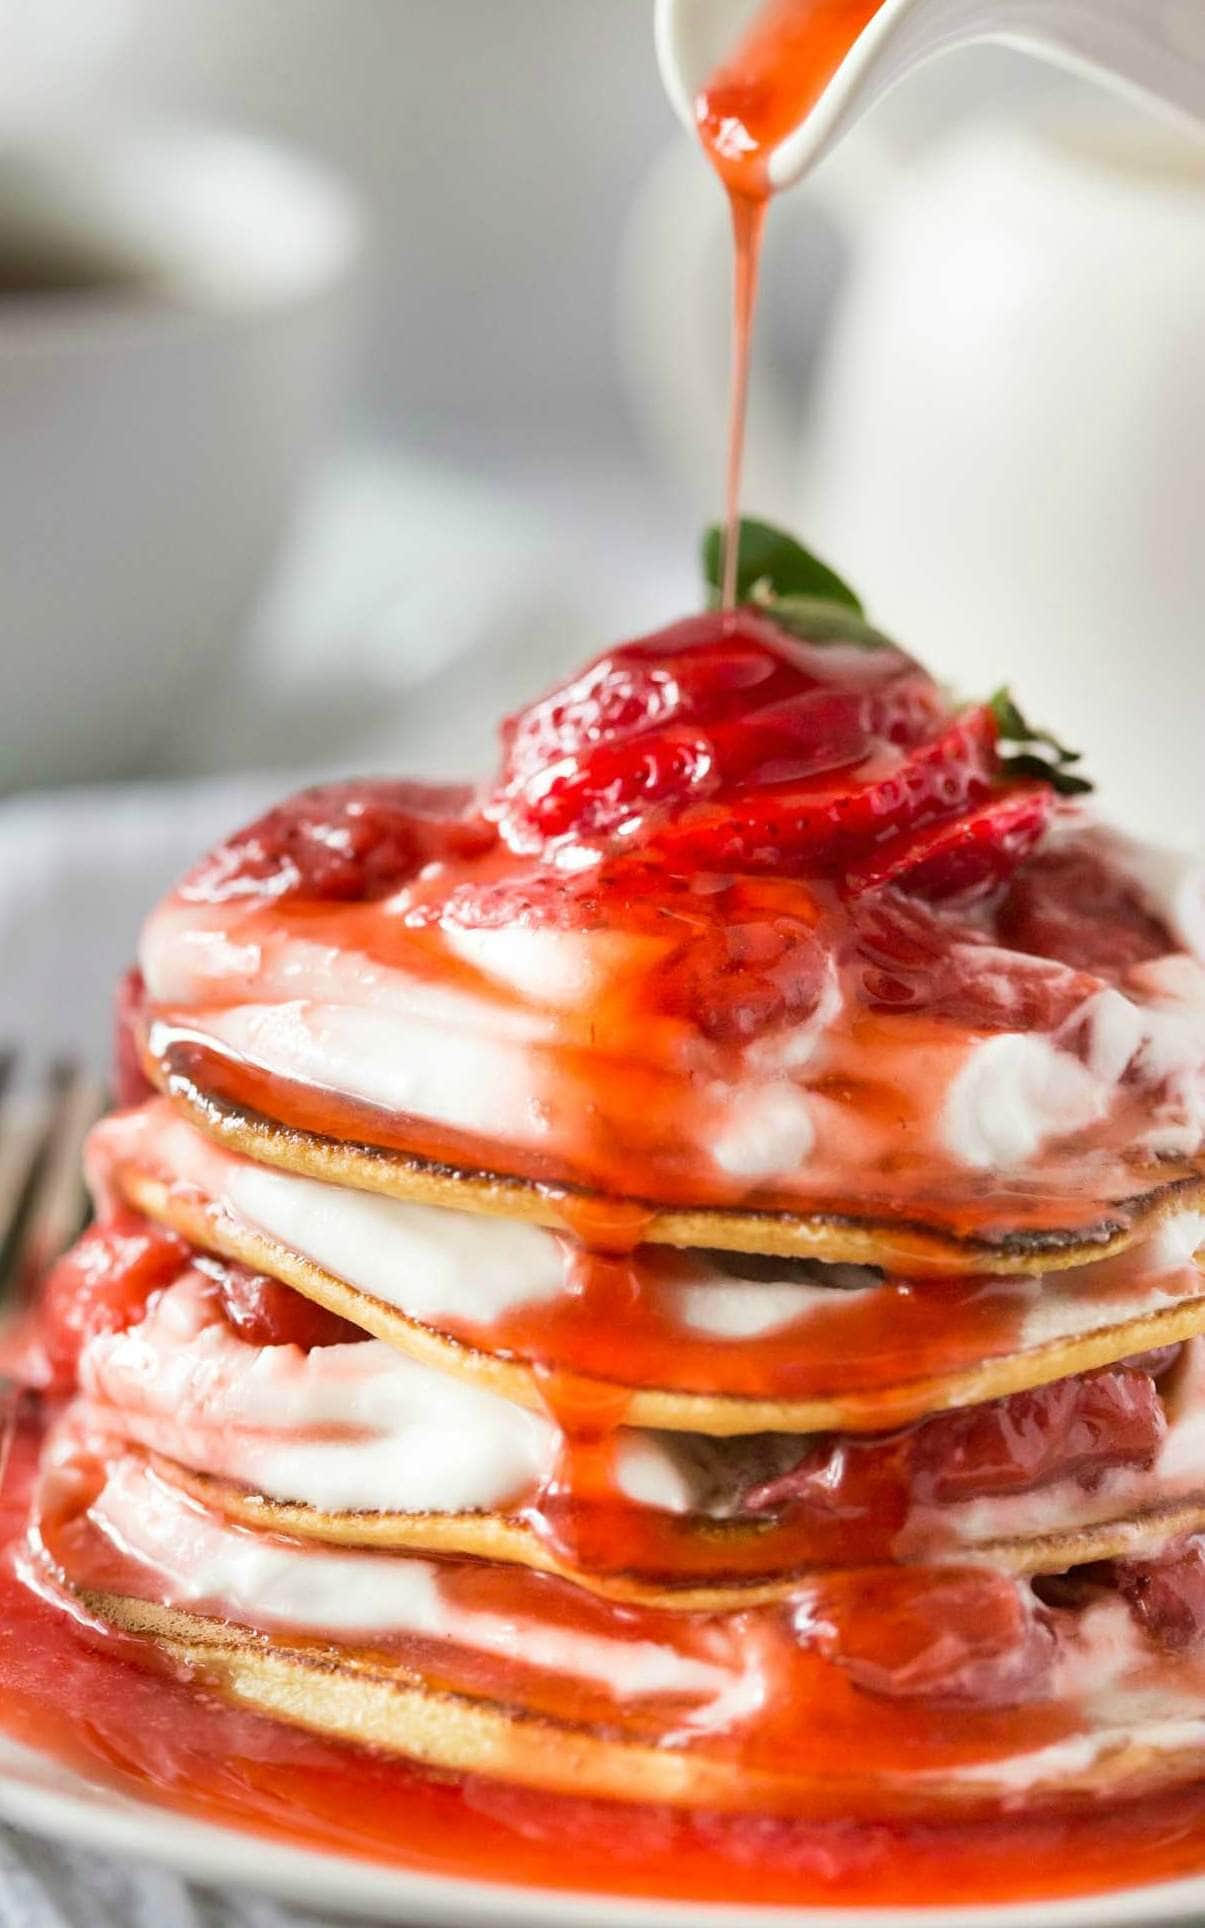 The 20+ BEST Clean Eating Brunch Recipes | These healthy and gluten-free ideas will have you begging for seconds! This food menu has make ahead dishes, casseroles, waffles, pancakes, eggs, fruit salads, spinach salads, and easy "clean" bread recipes. Whether you are throwing a party or serving your family these Sunday morning low carb breakfasts are just the ticket to leave your tummy happy all day. Mothers Day | Easter | Christmas | Paleo | Vegan | 21Day Fix